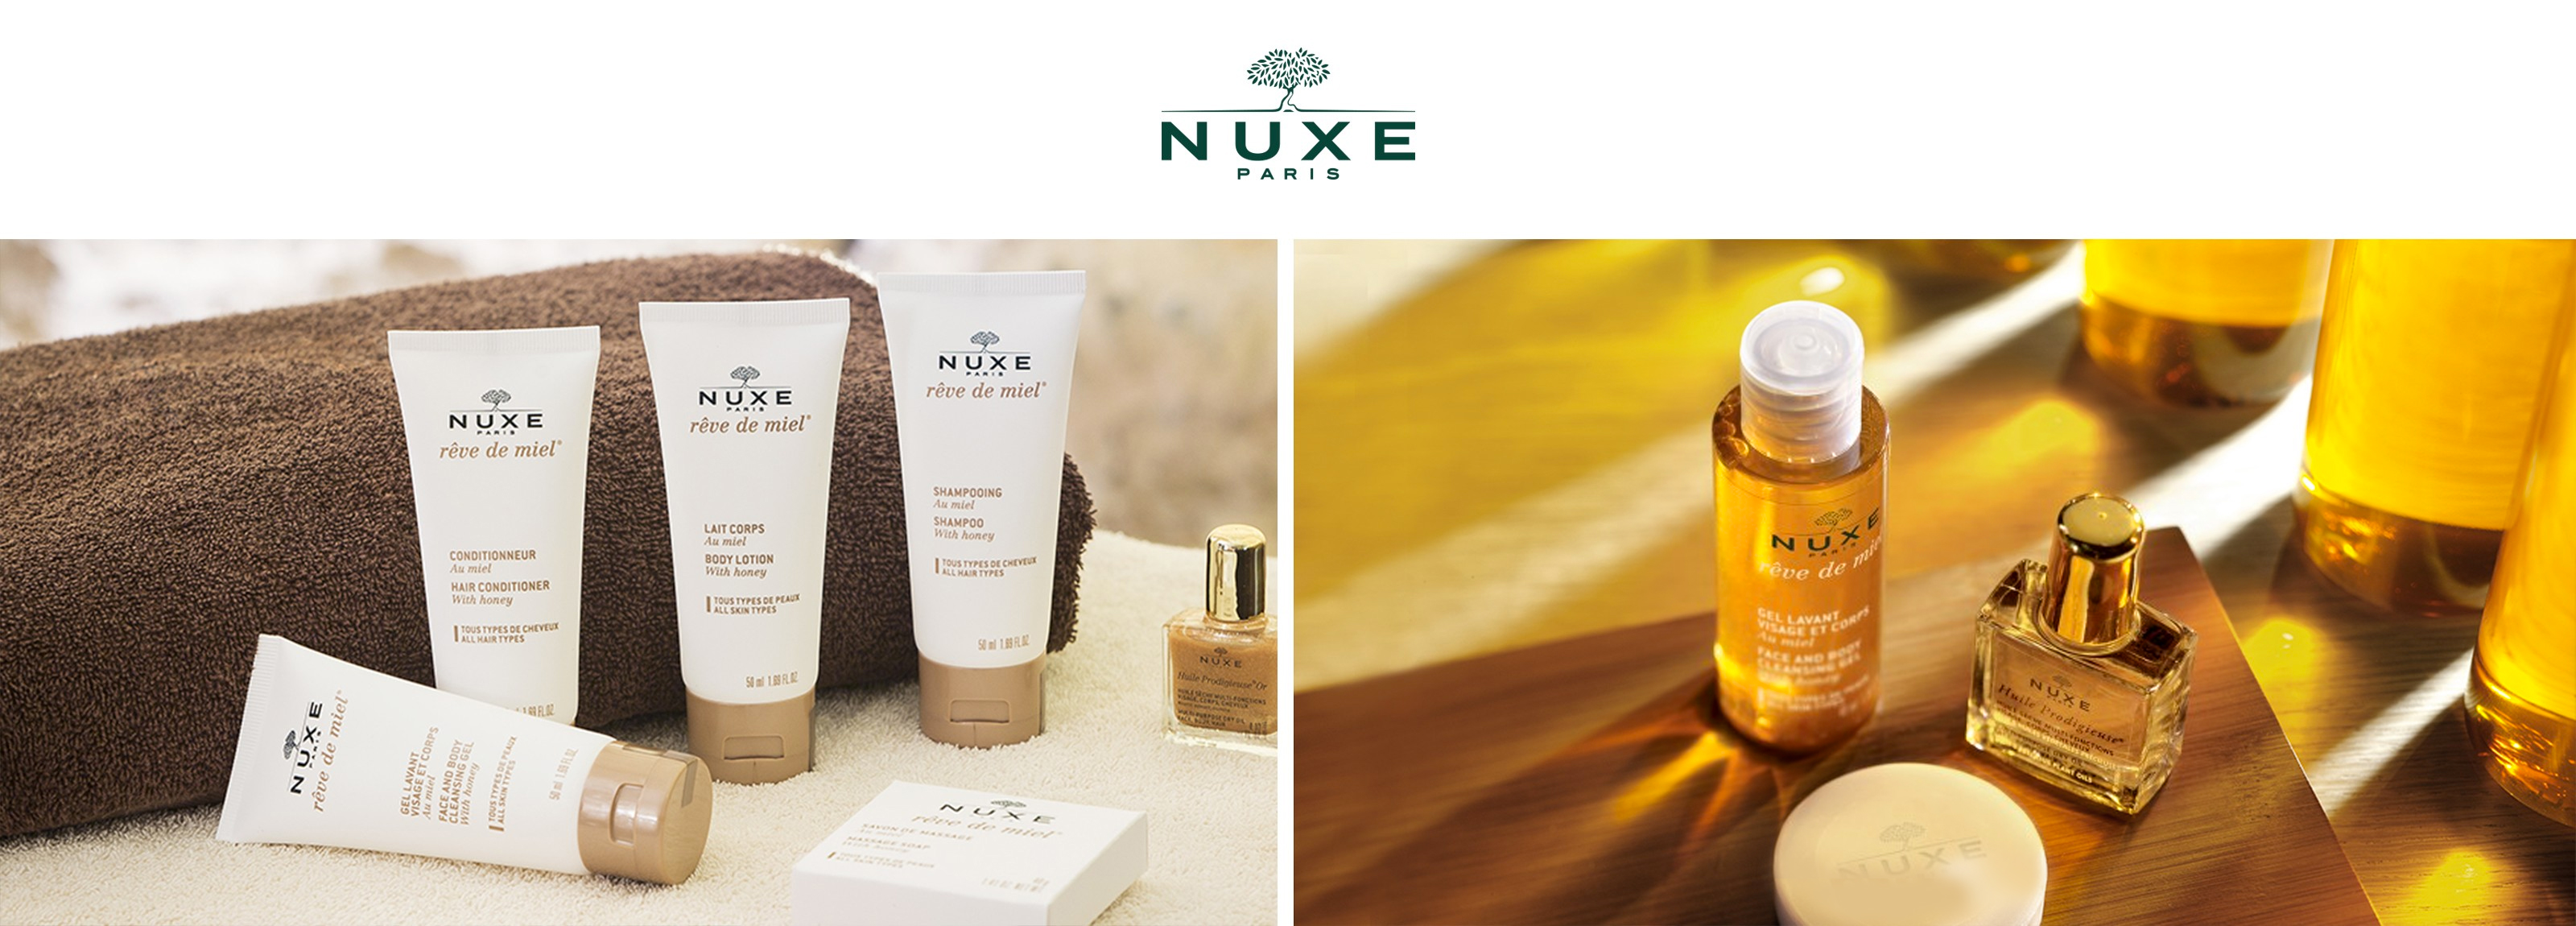 Nuxe products creams and oils